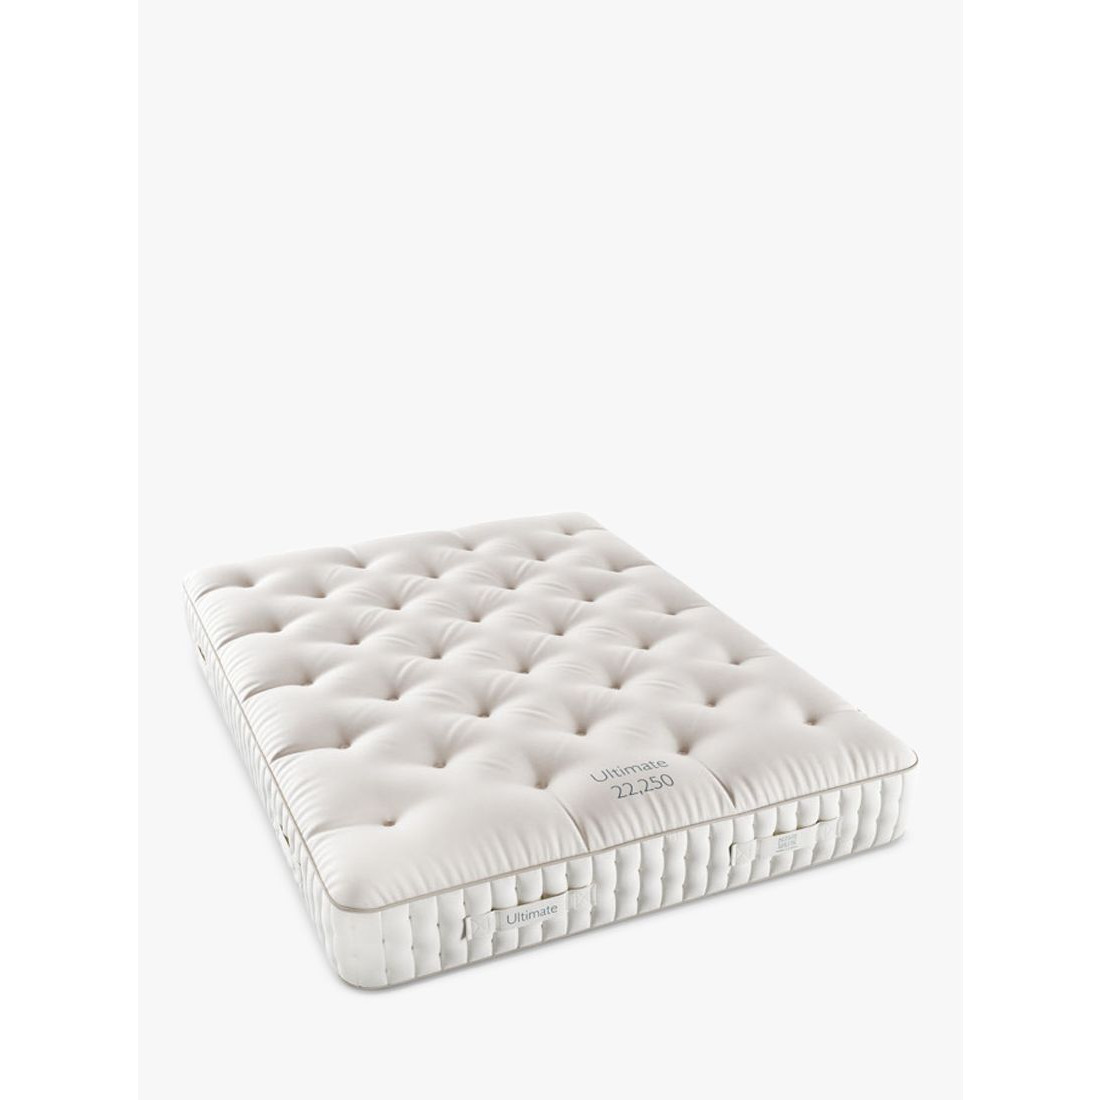 John Lewis Ultimate Natural Collection 22250 Mattress, Firmer Tension, Super King Size - image 1